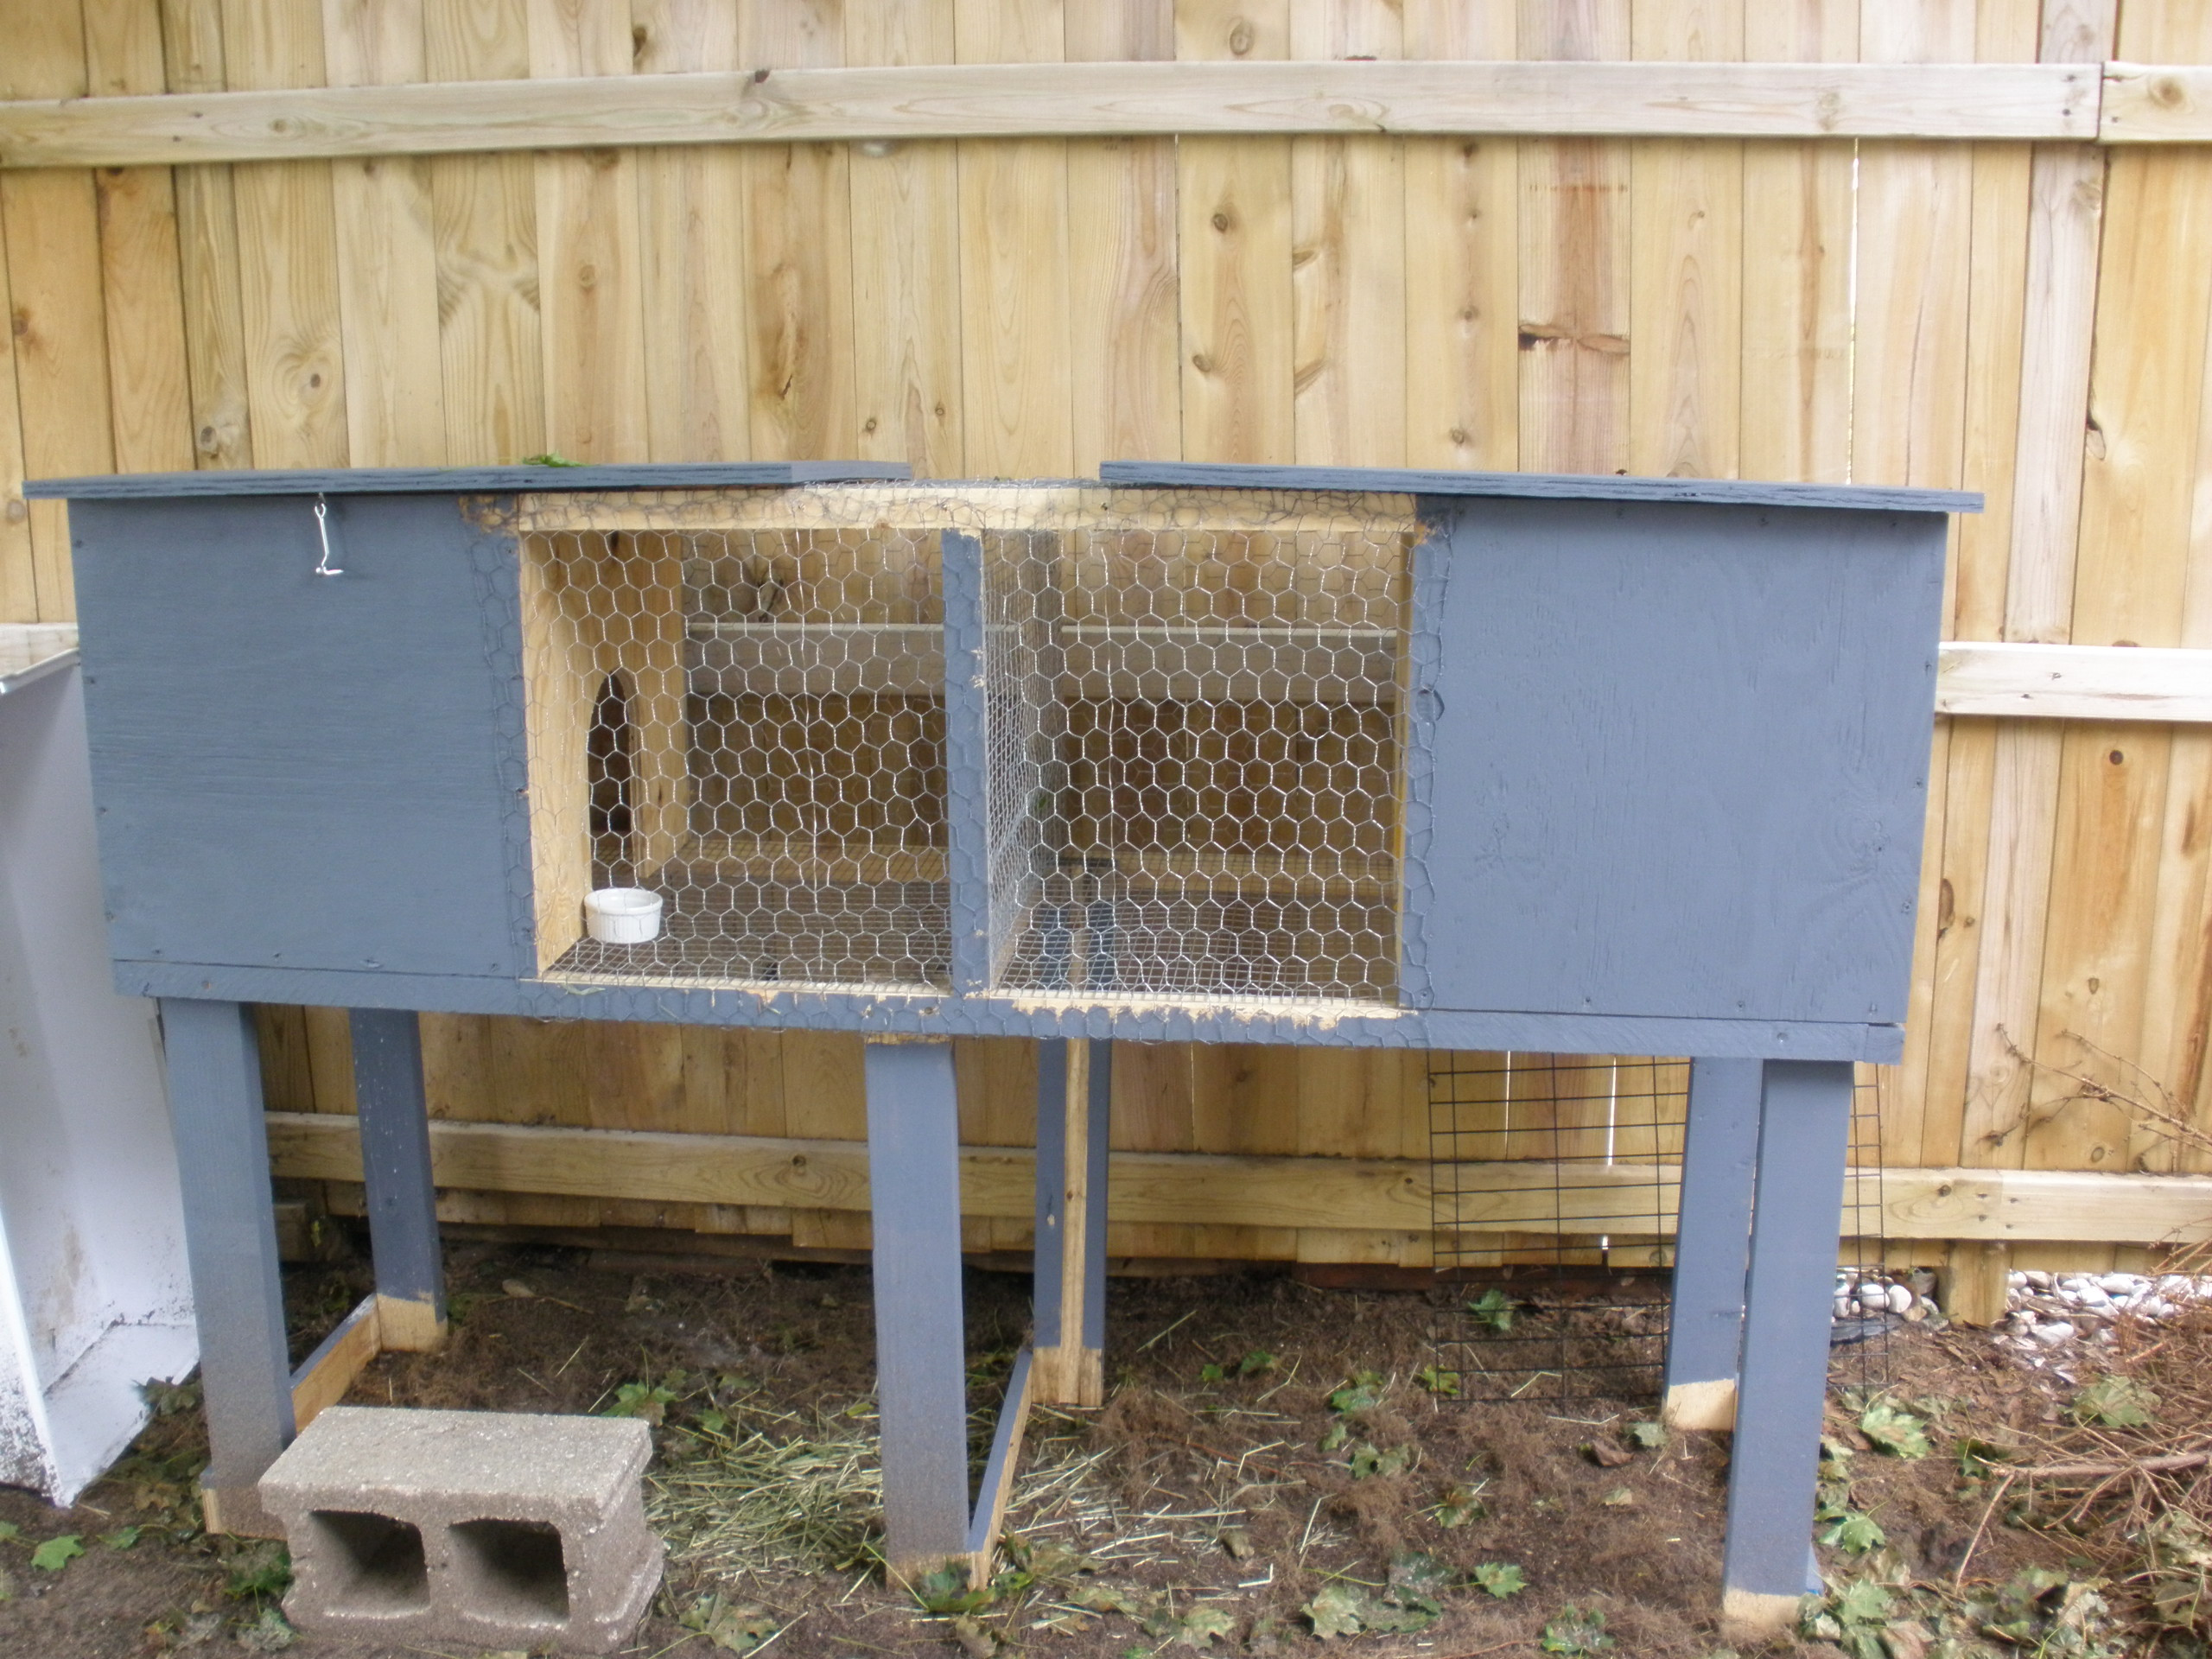 DIY Outdoor Rabbit Cage
 How to Build Meat Rabbit Hutch Plans Outdoor PDF Plans